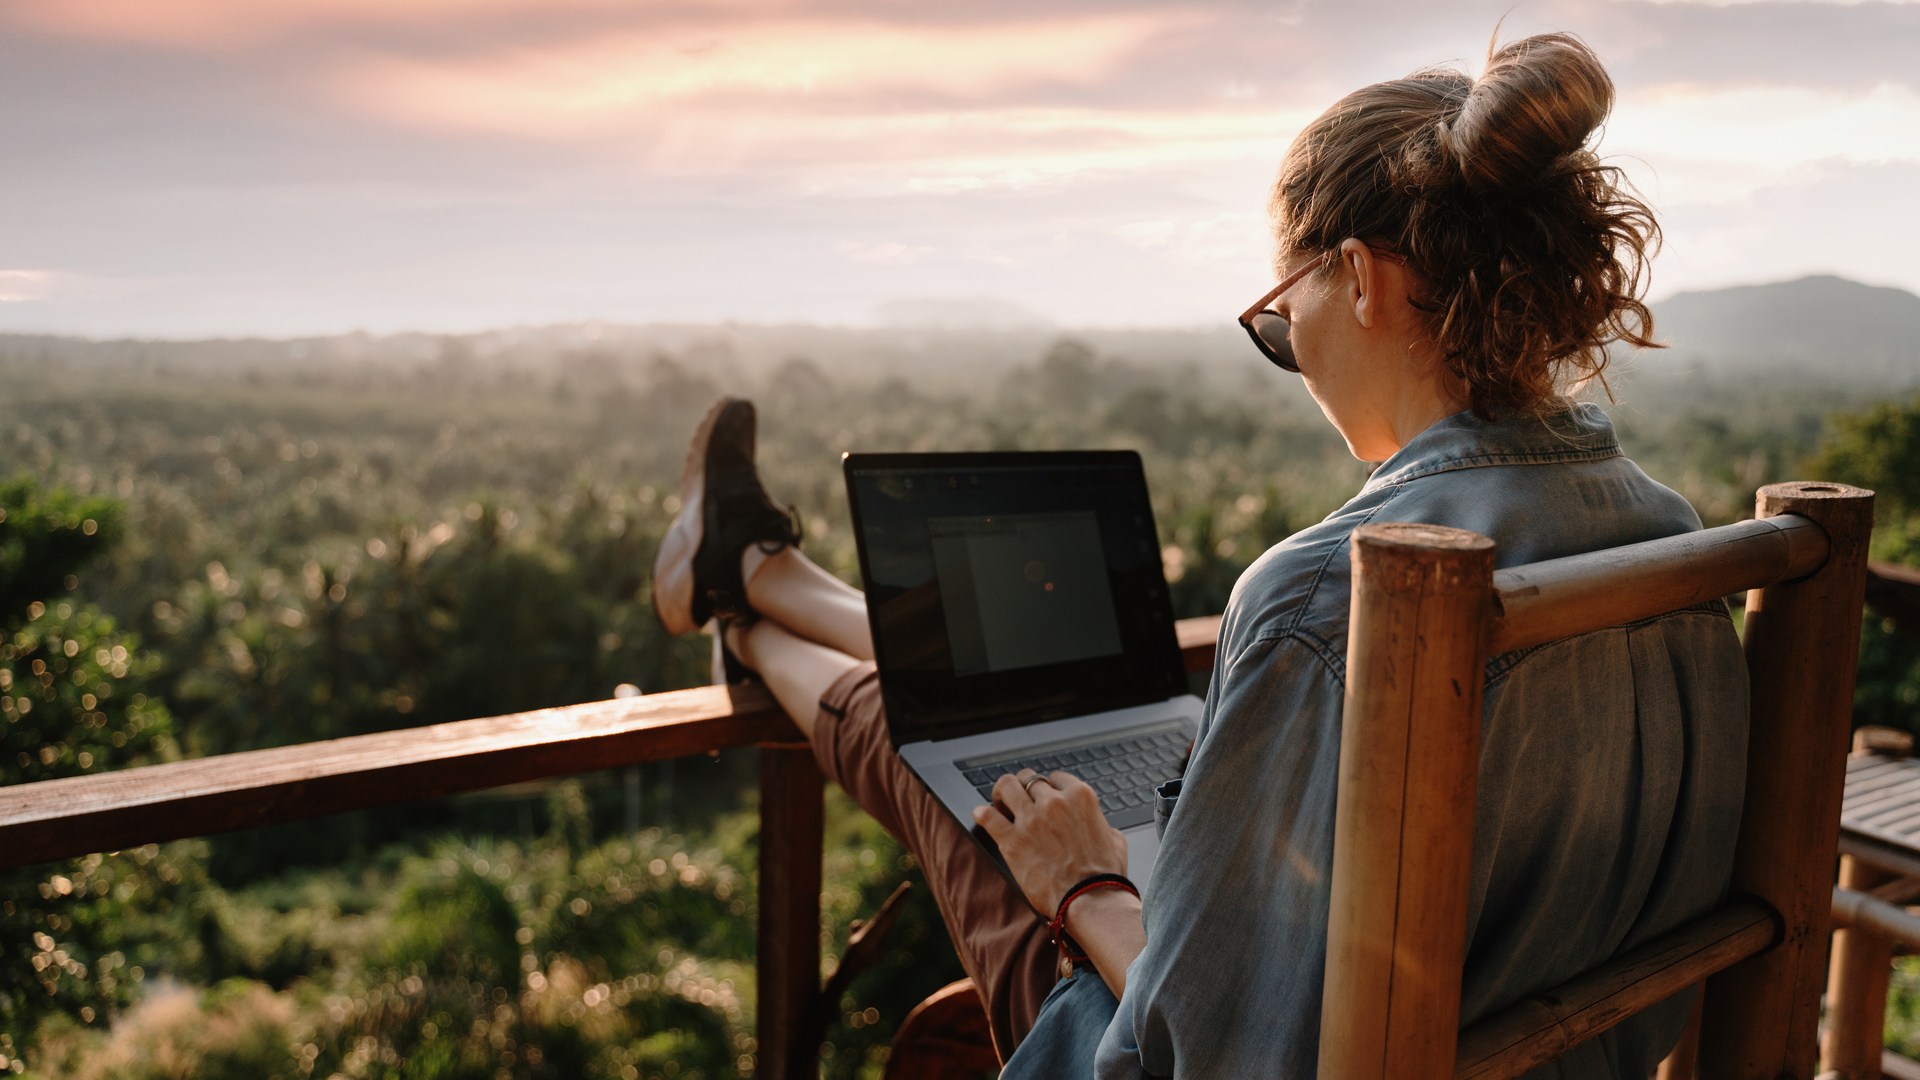 Remote workers are one of trends in 2022